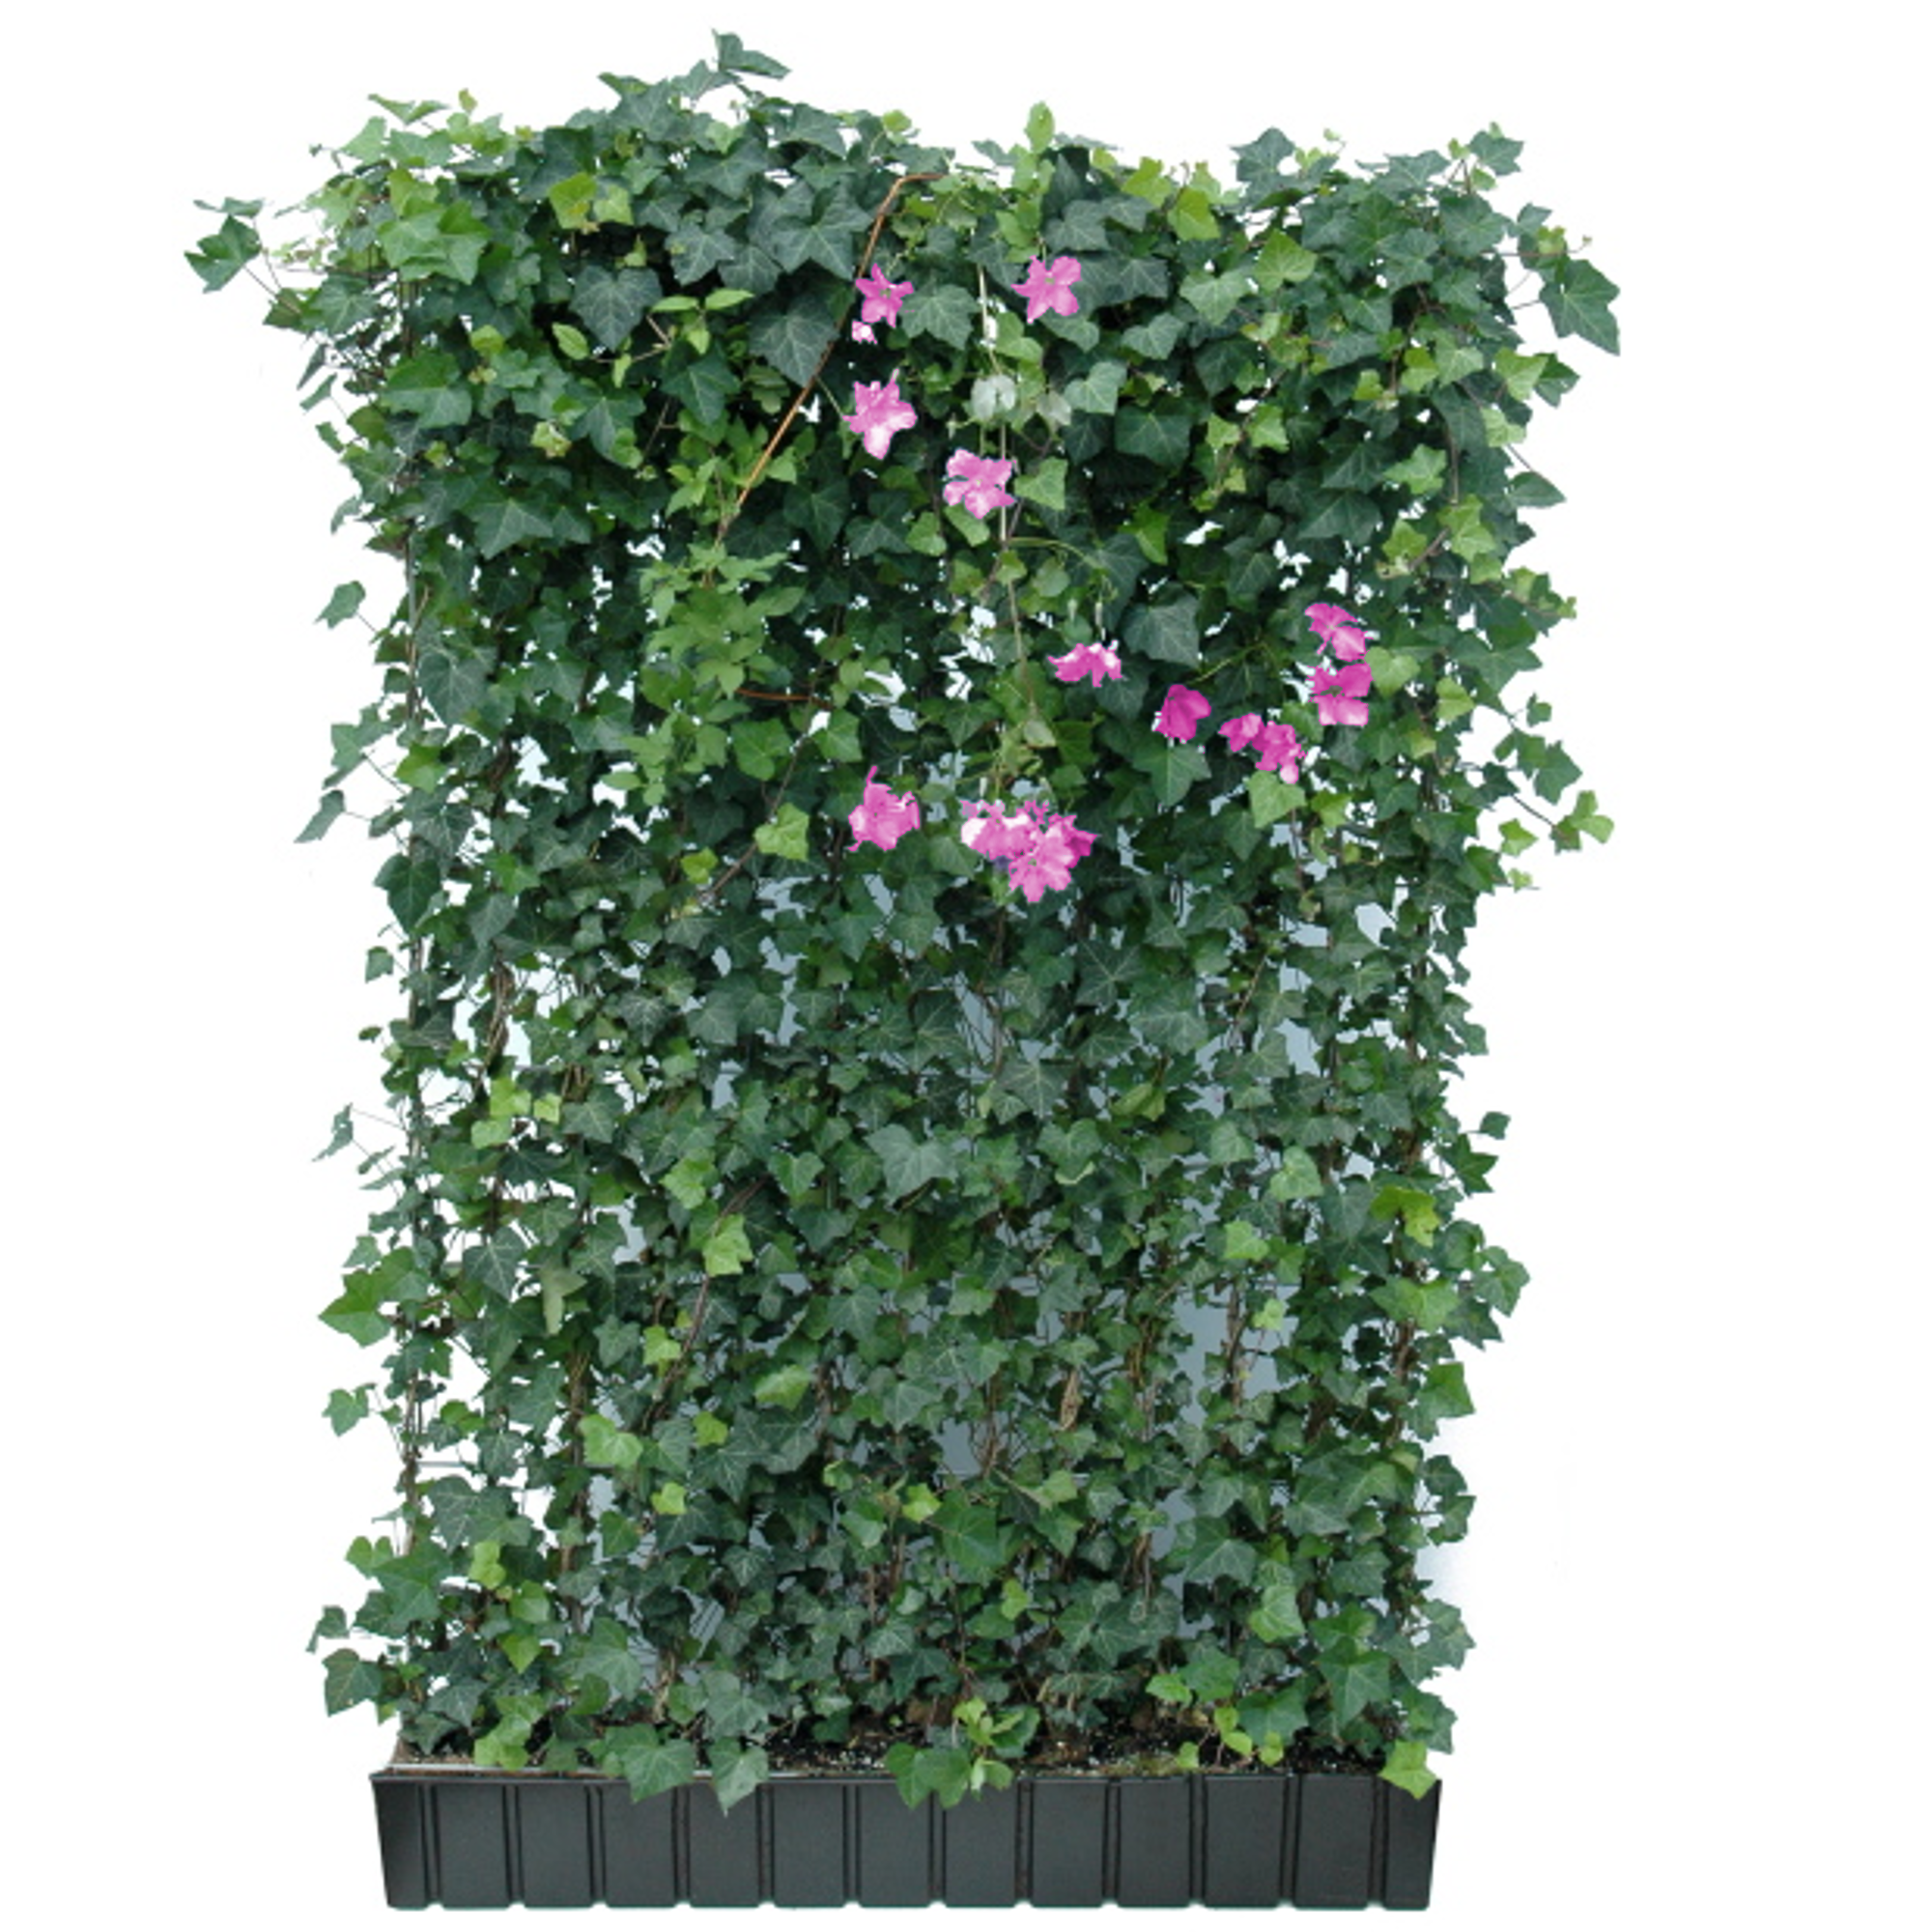 Hecke am laufenden Meter® Efeu 'Woerneri'/Clematis rosa 180 x 120 cm + product picture